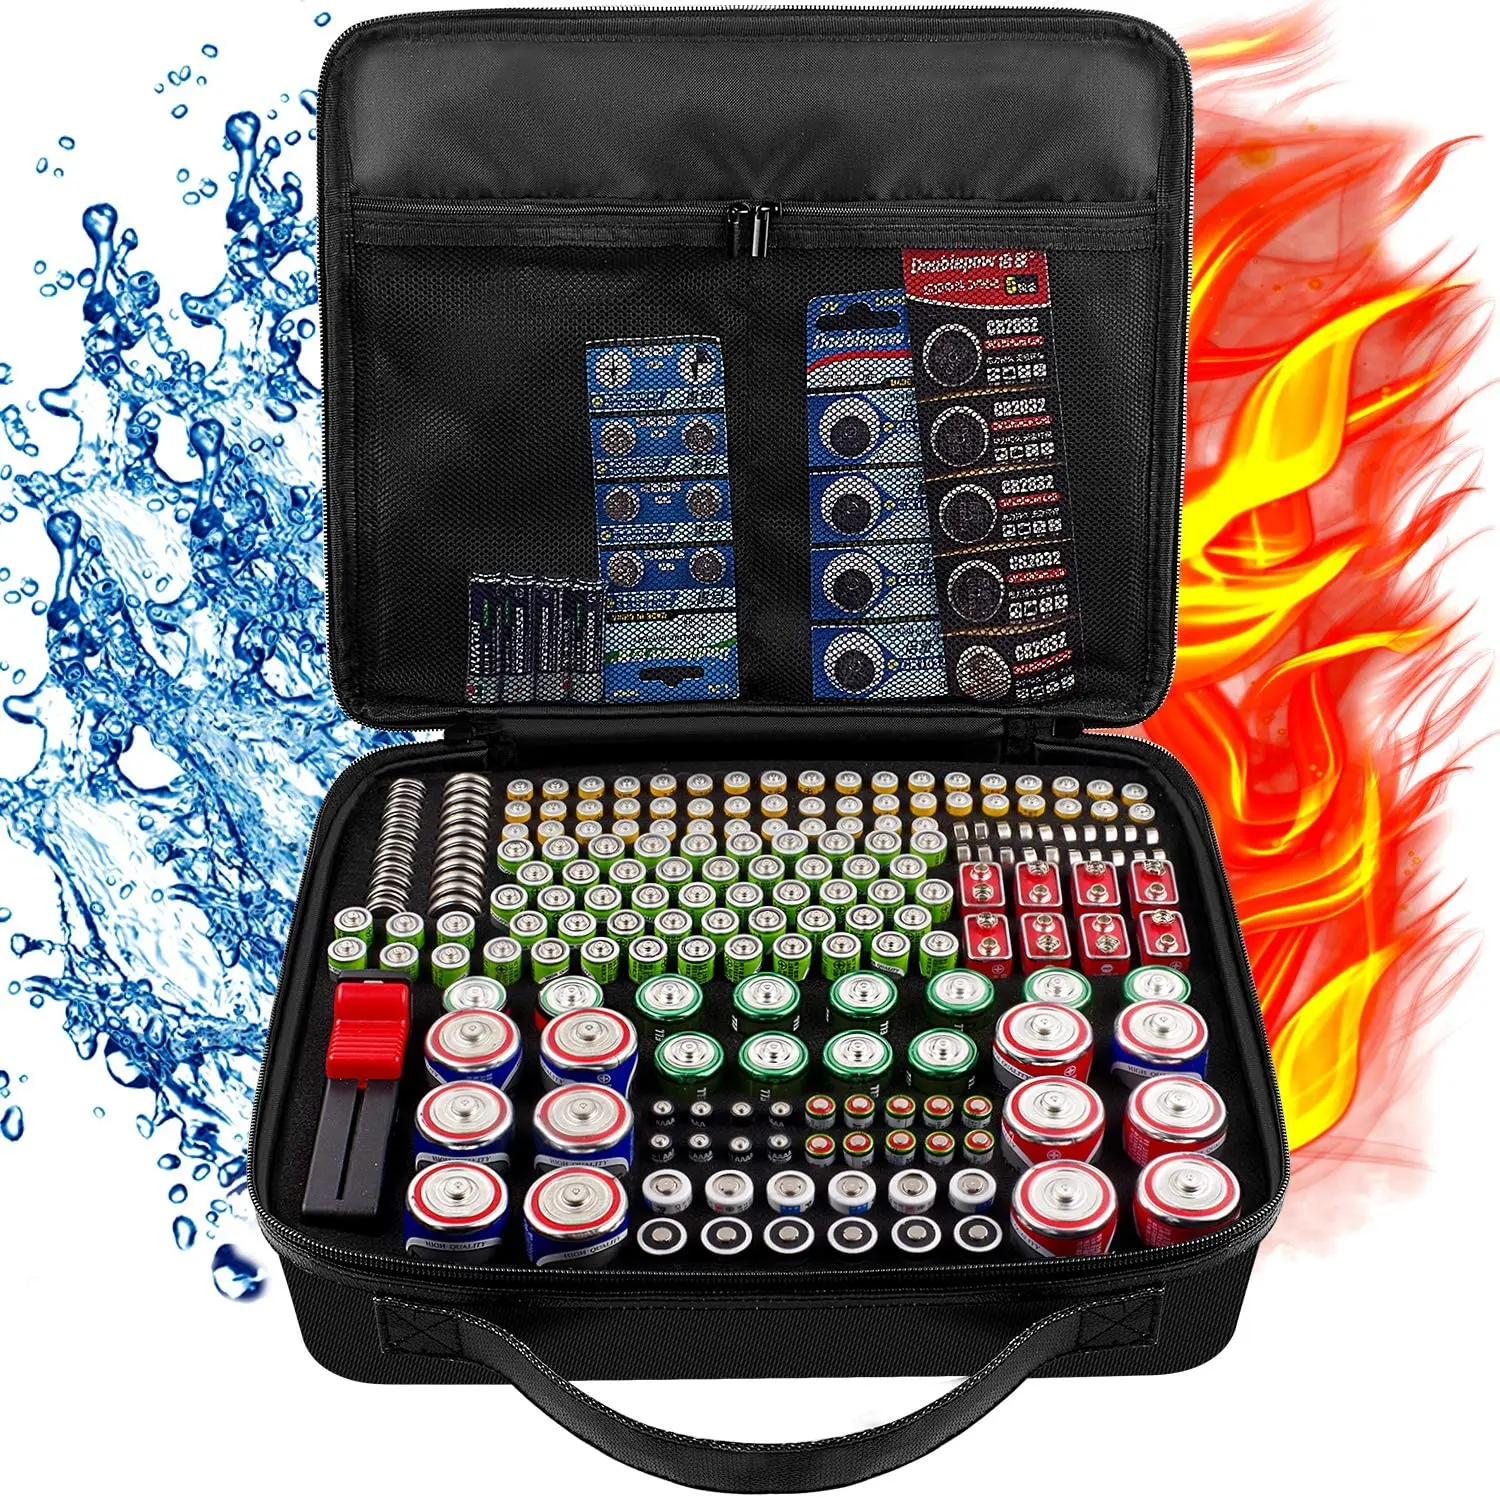 Garage Organization Holds 225 Batteries AA AAA C D Cell 9V 3V Lithium LR44 CR2 CR1632 CR2032 Batteries Storage Containers Box Case with Tester Checker BT-168 Battery Organizer Holder